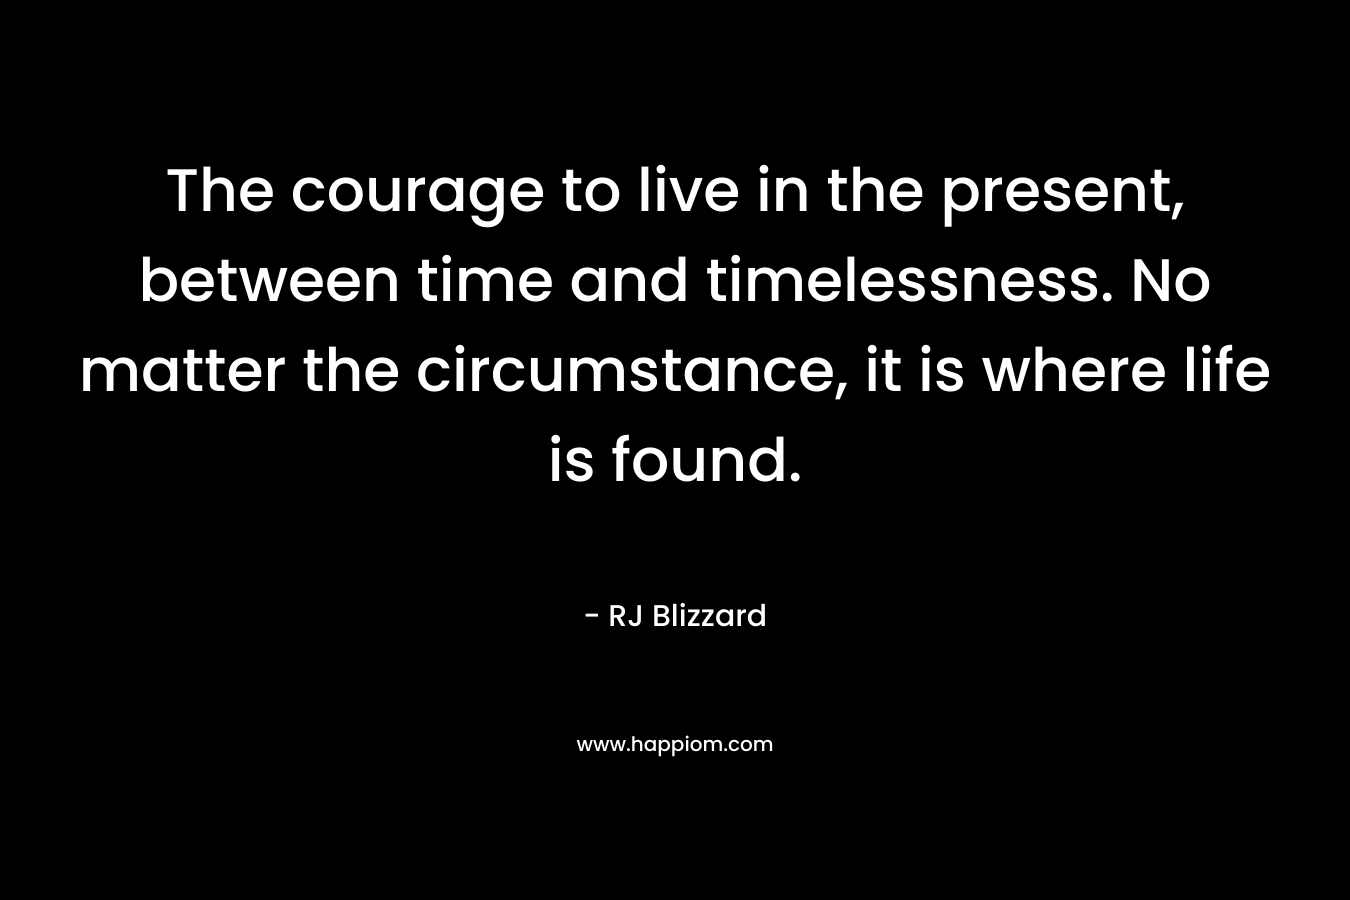 The courage to live in the present, between time and timelessness. No matter the circumstance, it is where life is found.